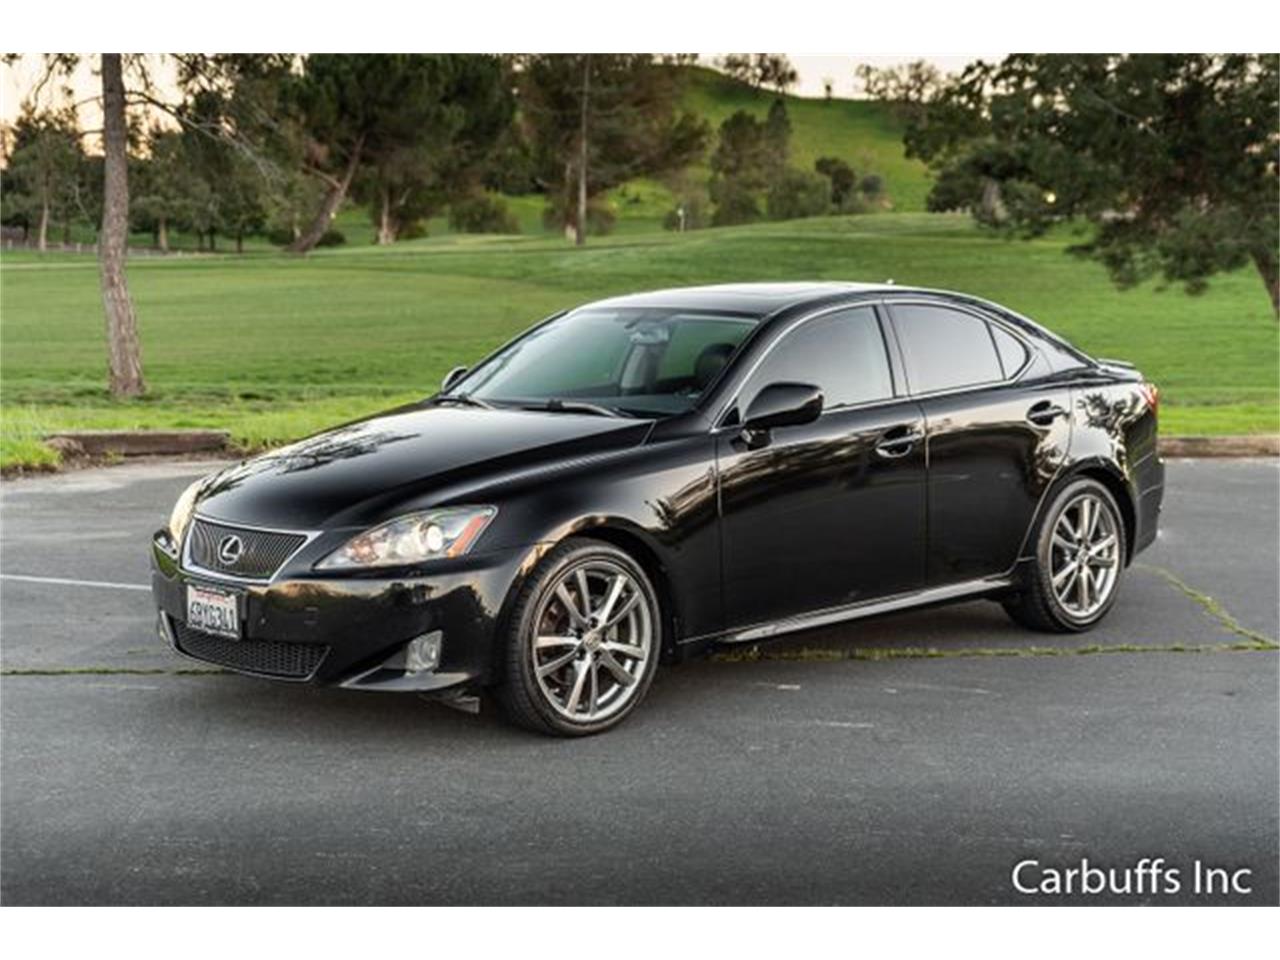 2008 Lexus IS250 for sale in Concord, CA /